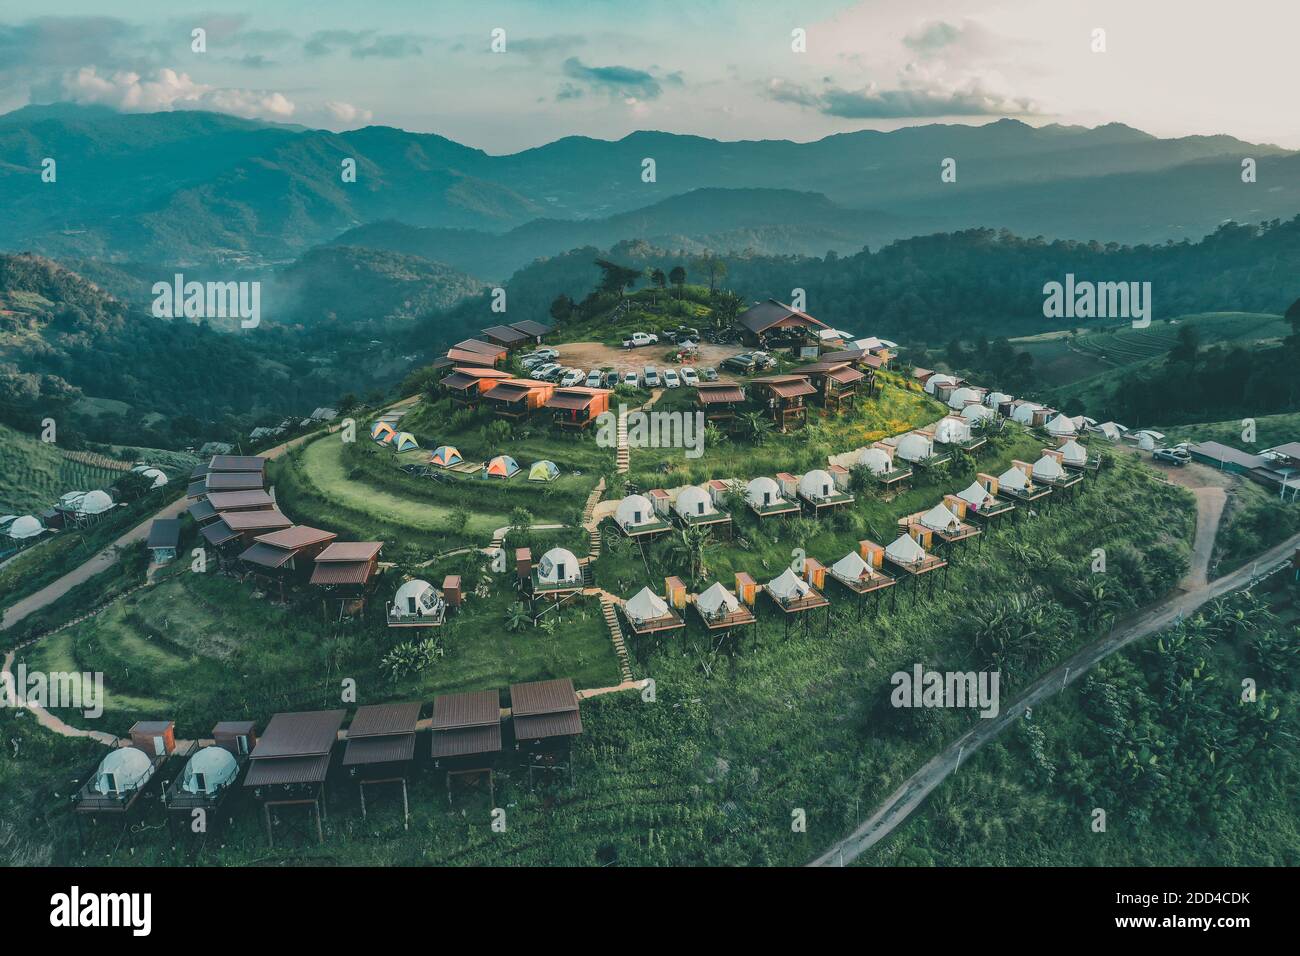 Aerial view of camping grounds and tents on Doi Mon Cham mountain in Mae Rim, Chiang Mai province, Thailand, south east asia Stock Photo